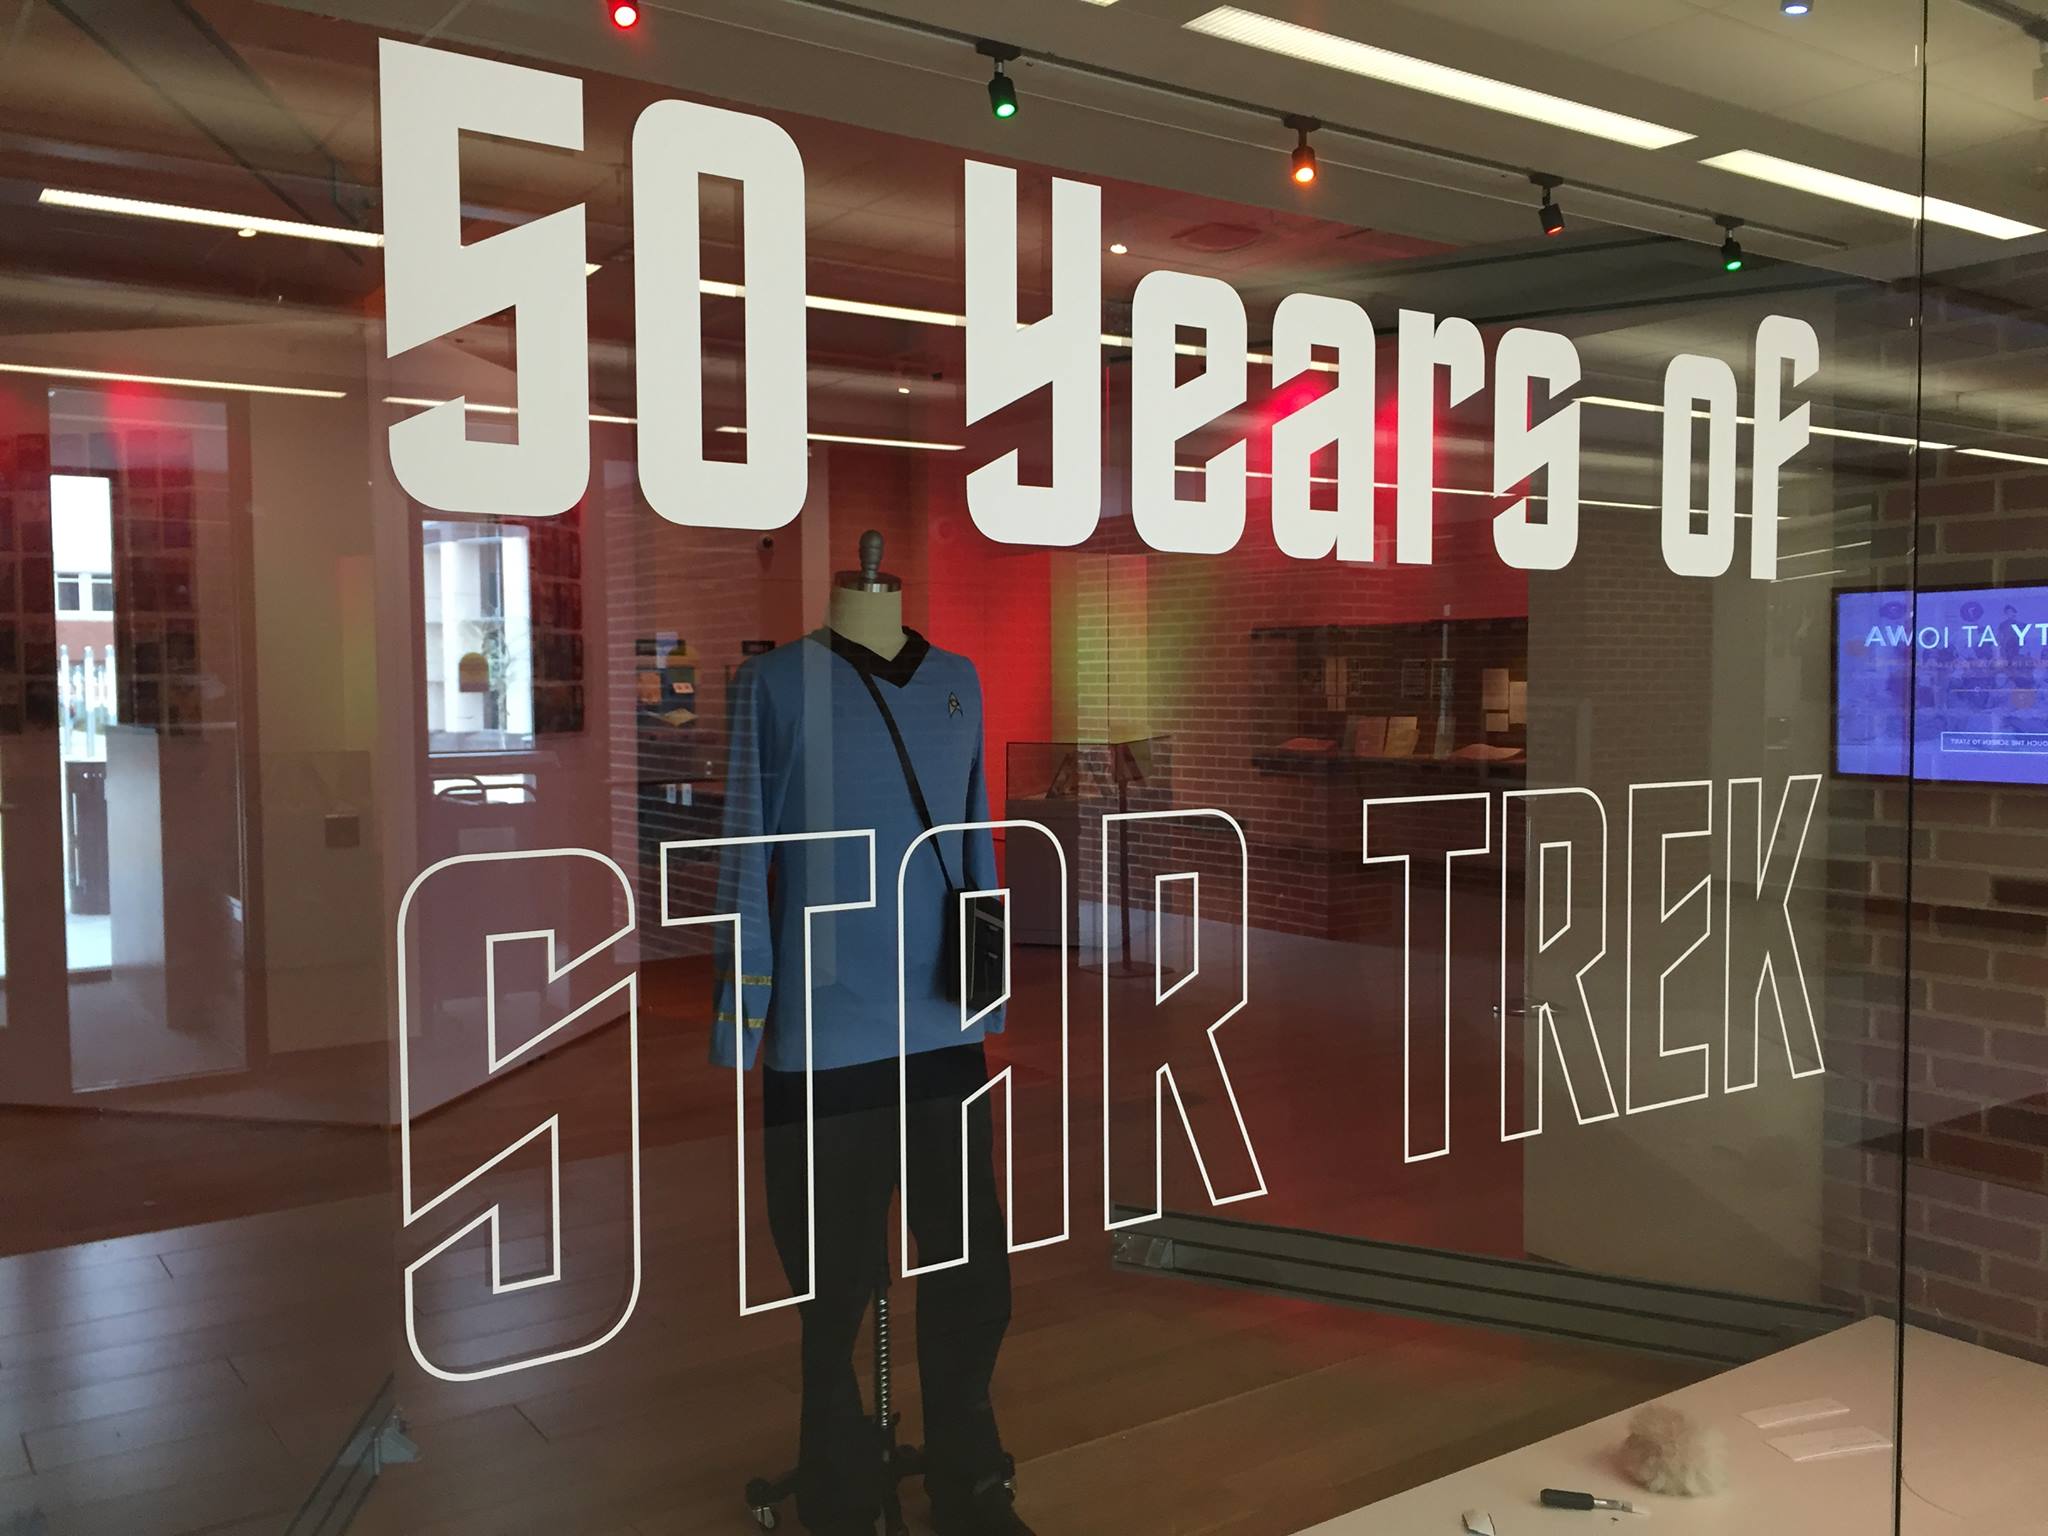 Exhibition title on the front window "50 Years of Star Trek"